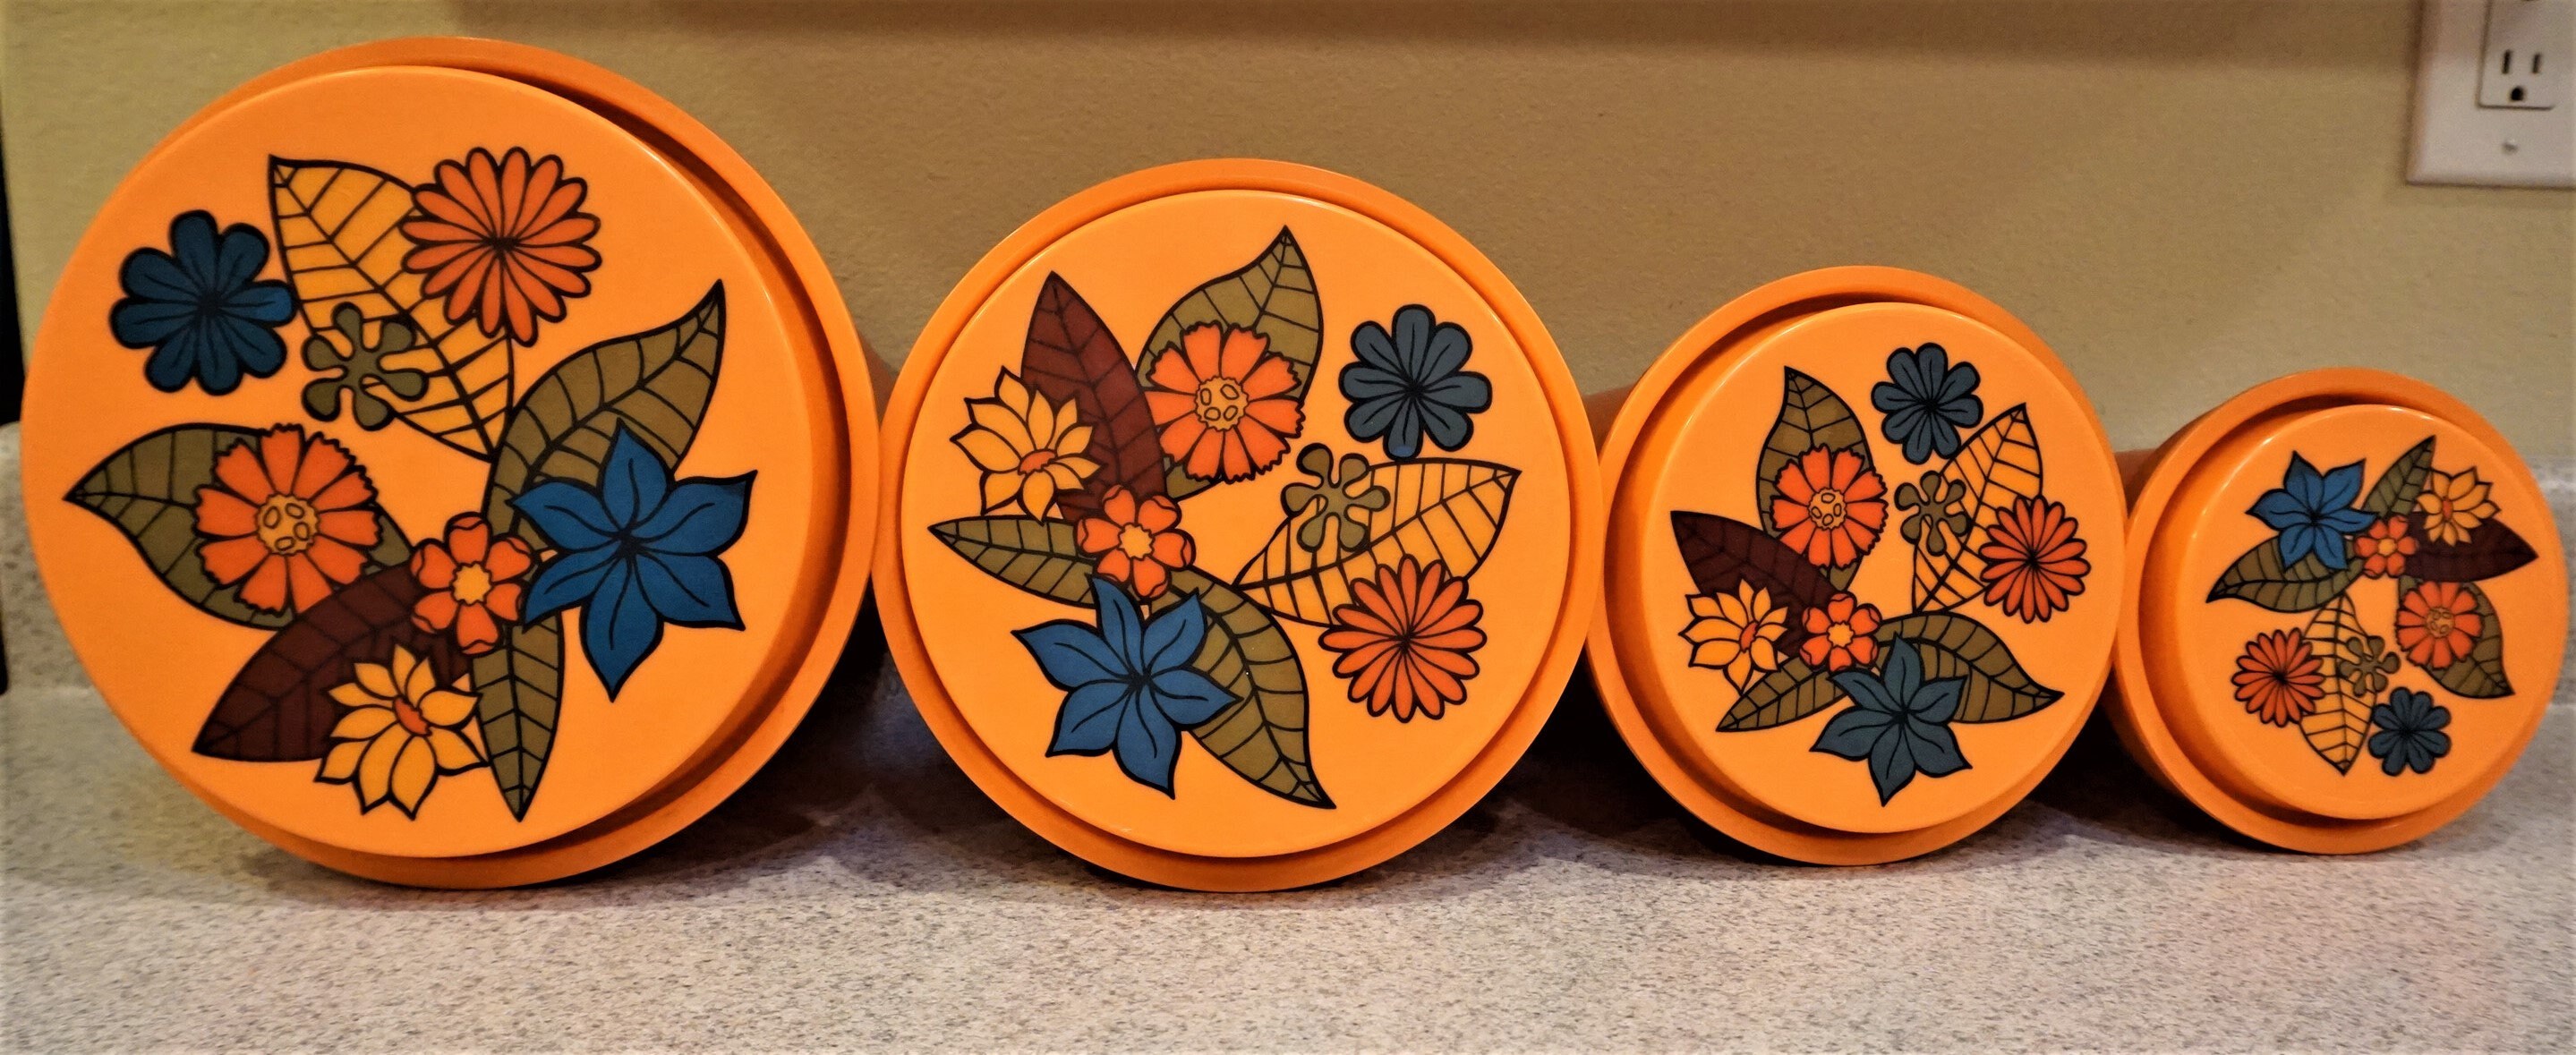 4pc Rubbermaid Flower Power Orange Canister Set, Boho, Hippie, Eclectic  Style, Vintage 60s 70s 